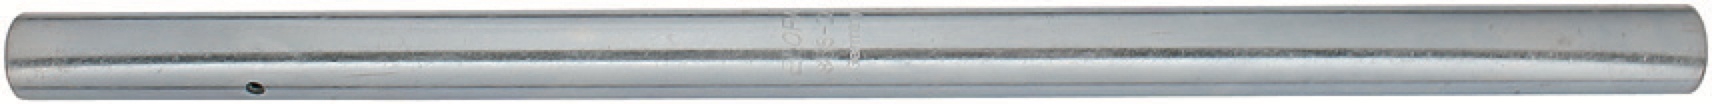 ELORA 855-22 Tommy Bar Tube (ELORA Tools) - Premium Tommy Bar from ELORA - Shop now at Yew Aik.